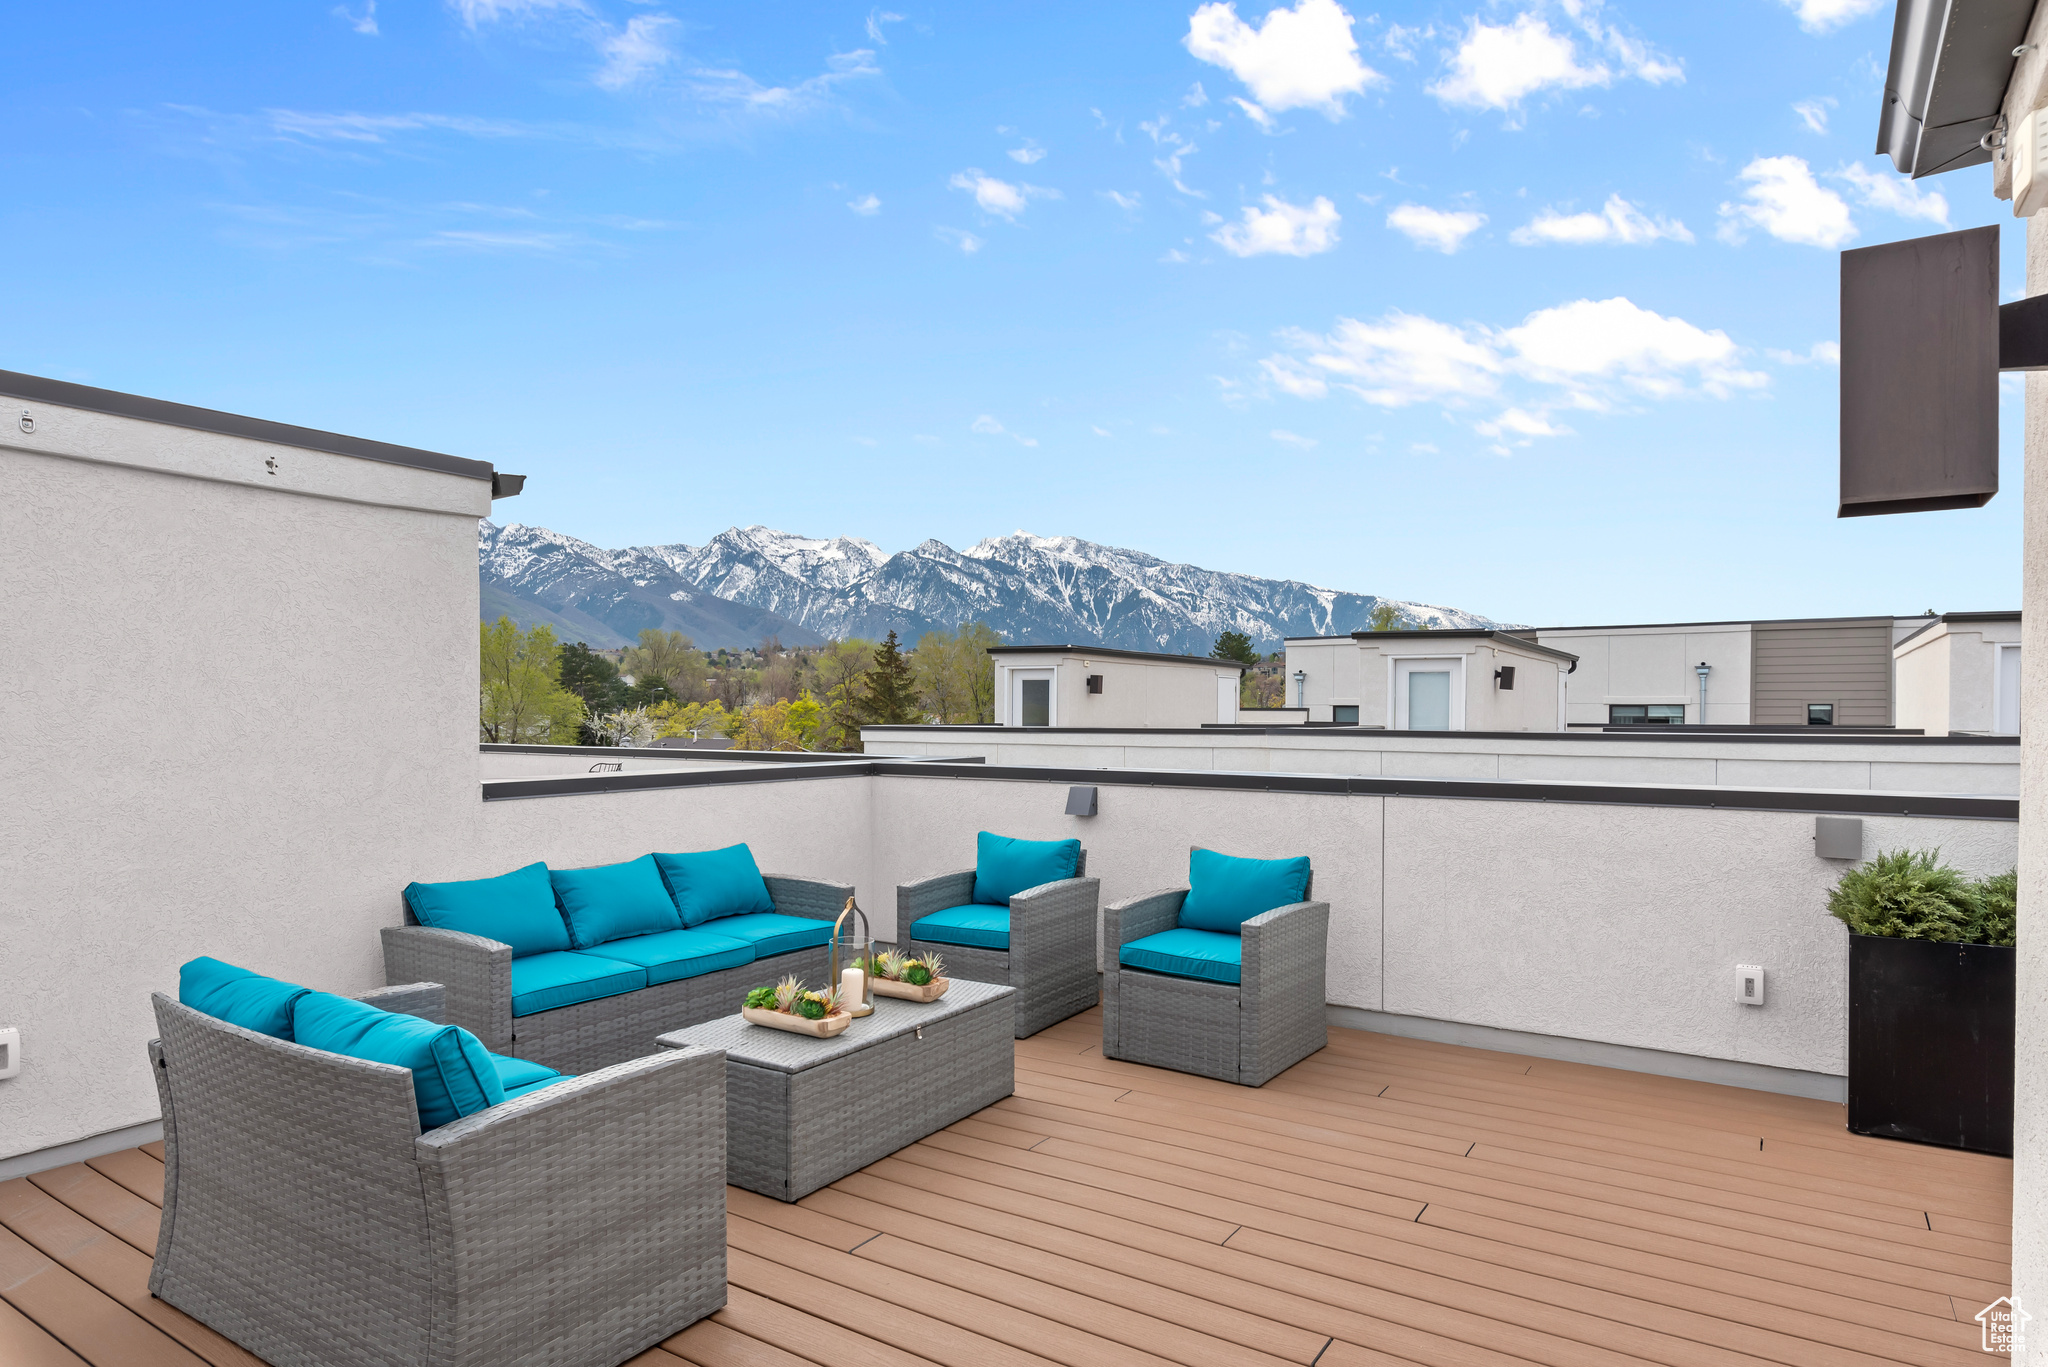 Roof Top Deck with an outdoor living space and a mountain view